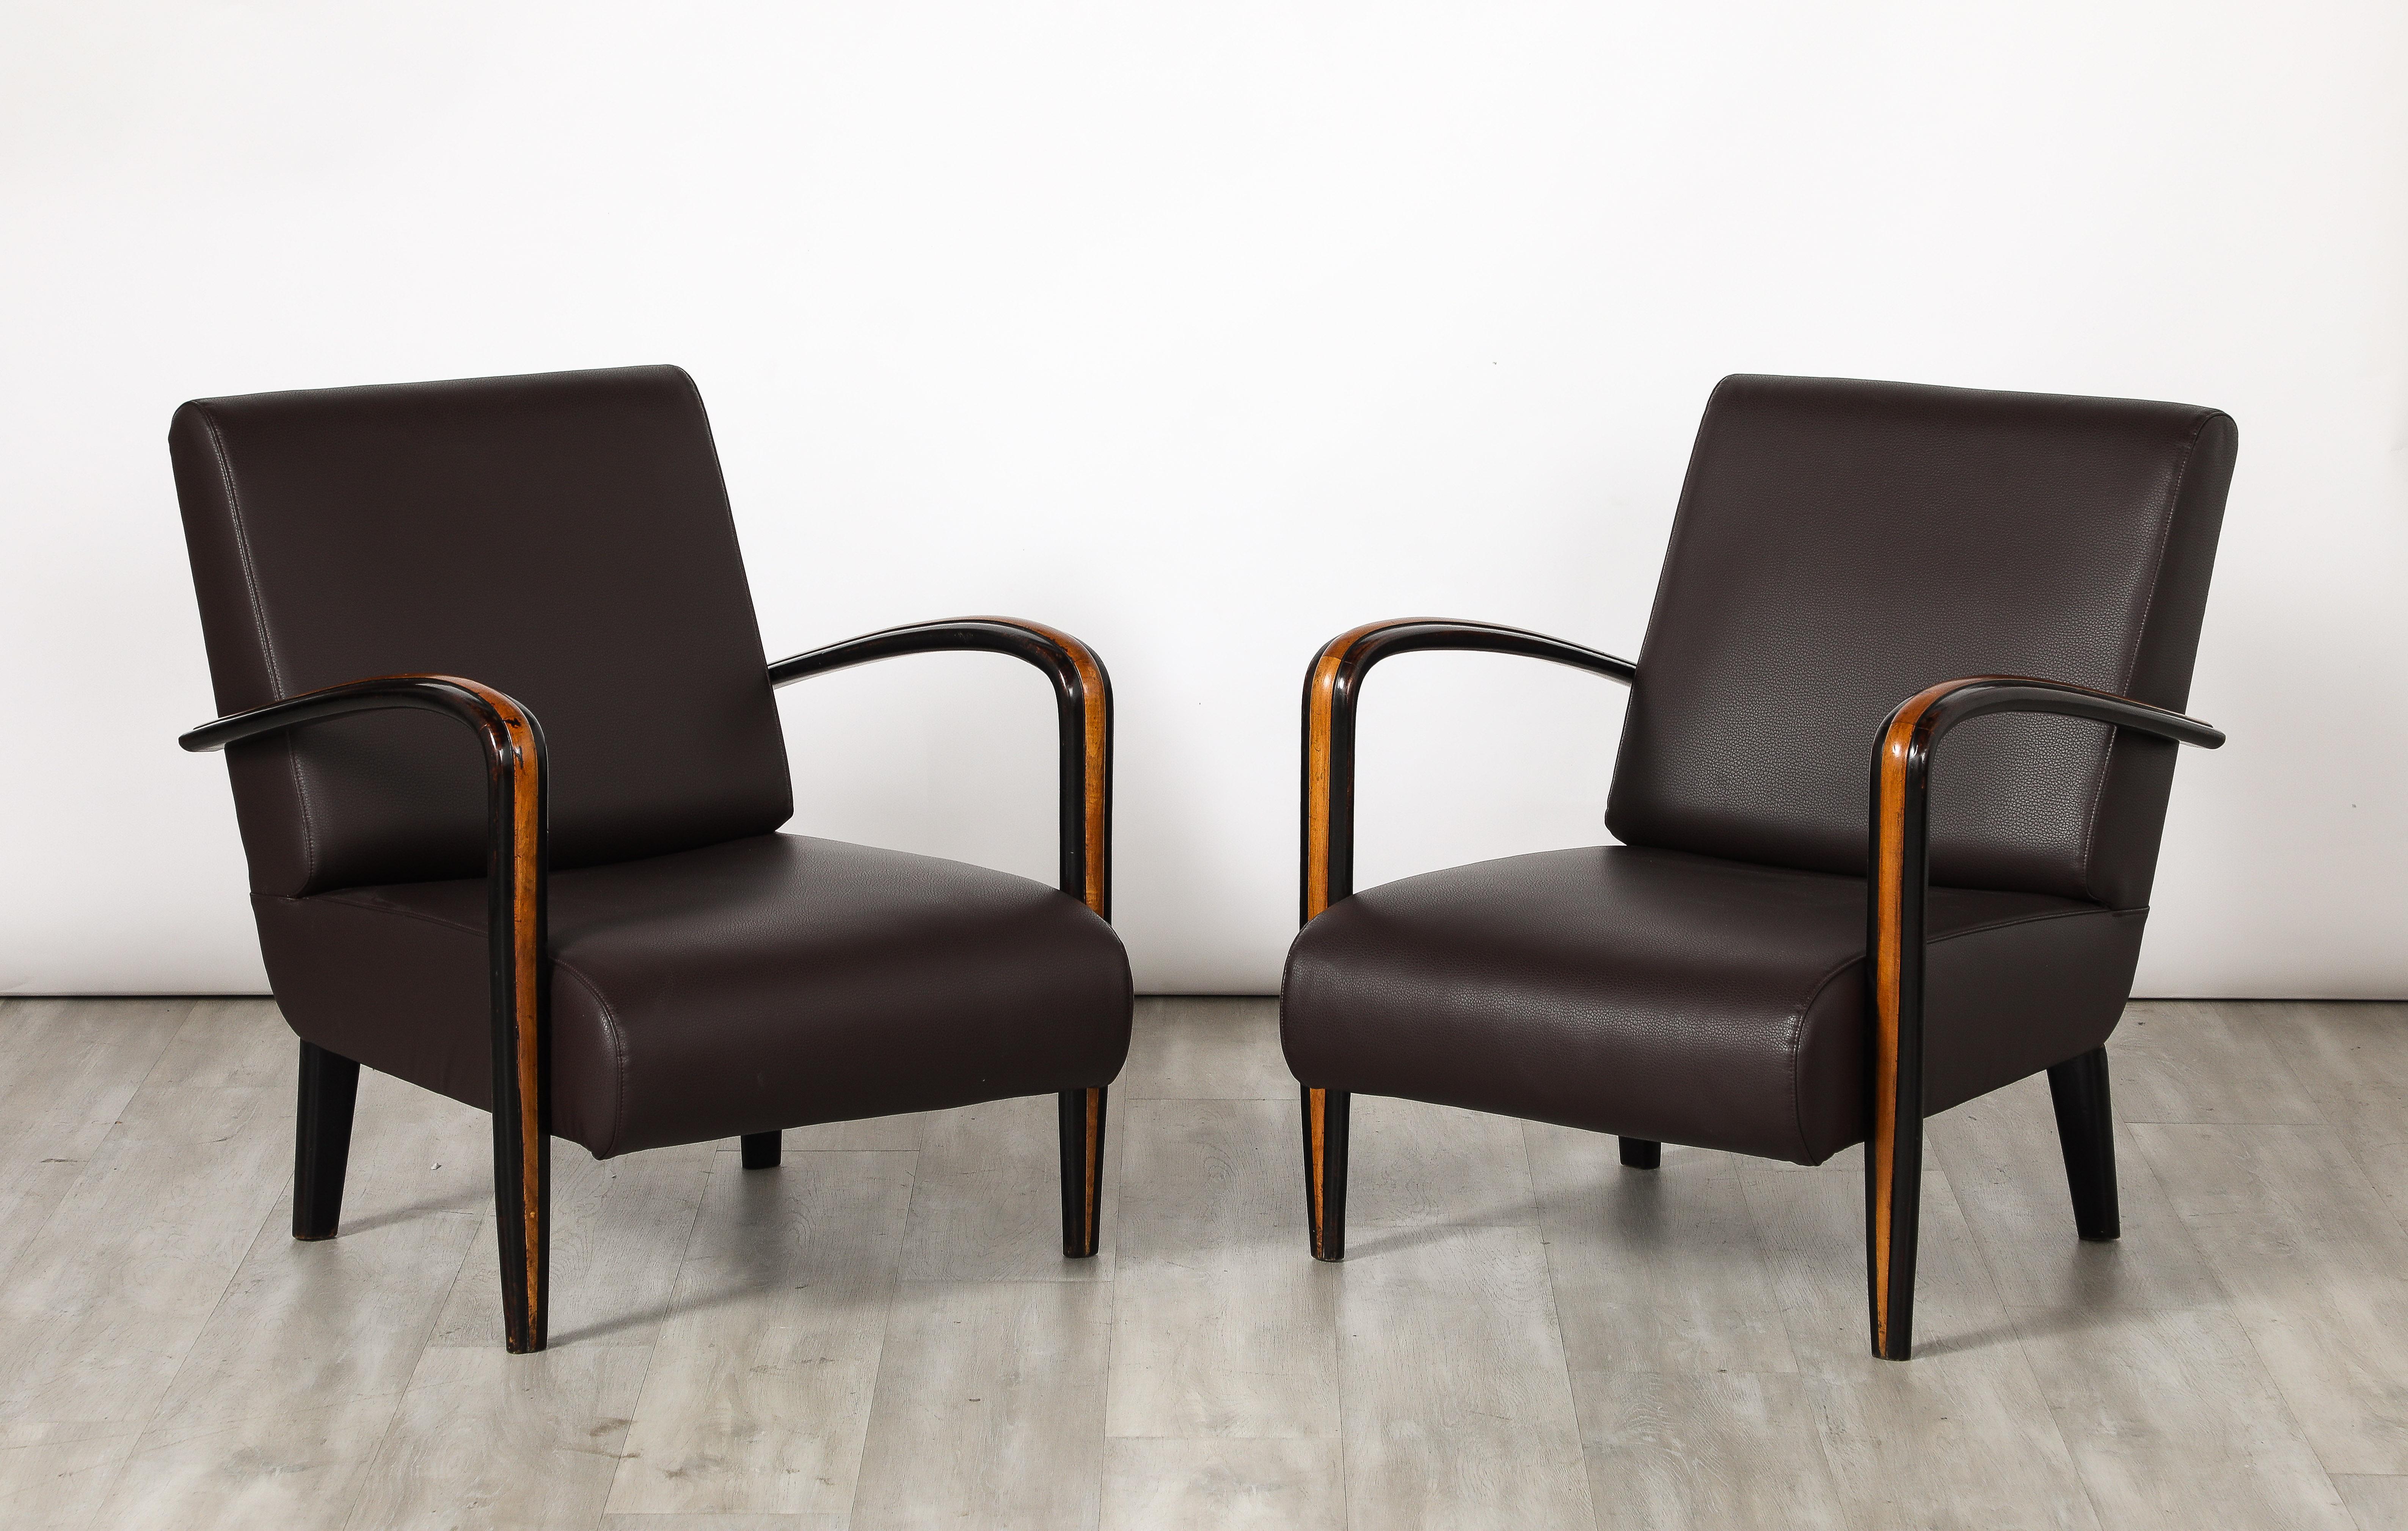 A pair of Italian Art Deco lounge chairs with elegantly sloped arms carved in walnut with a contrasting fruitwood inlay.  Newly re-upholstered in a chocolate brown Italian leather.  A striking and sophisticated design; so indicative of the Art Deco